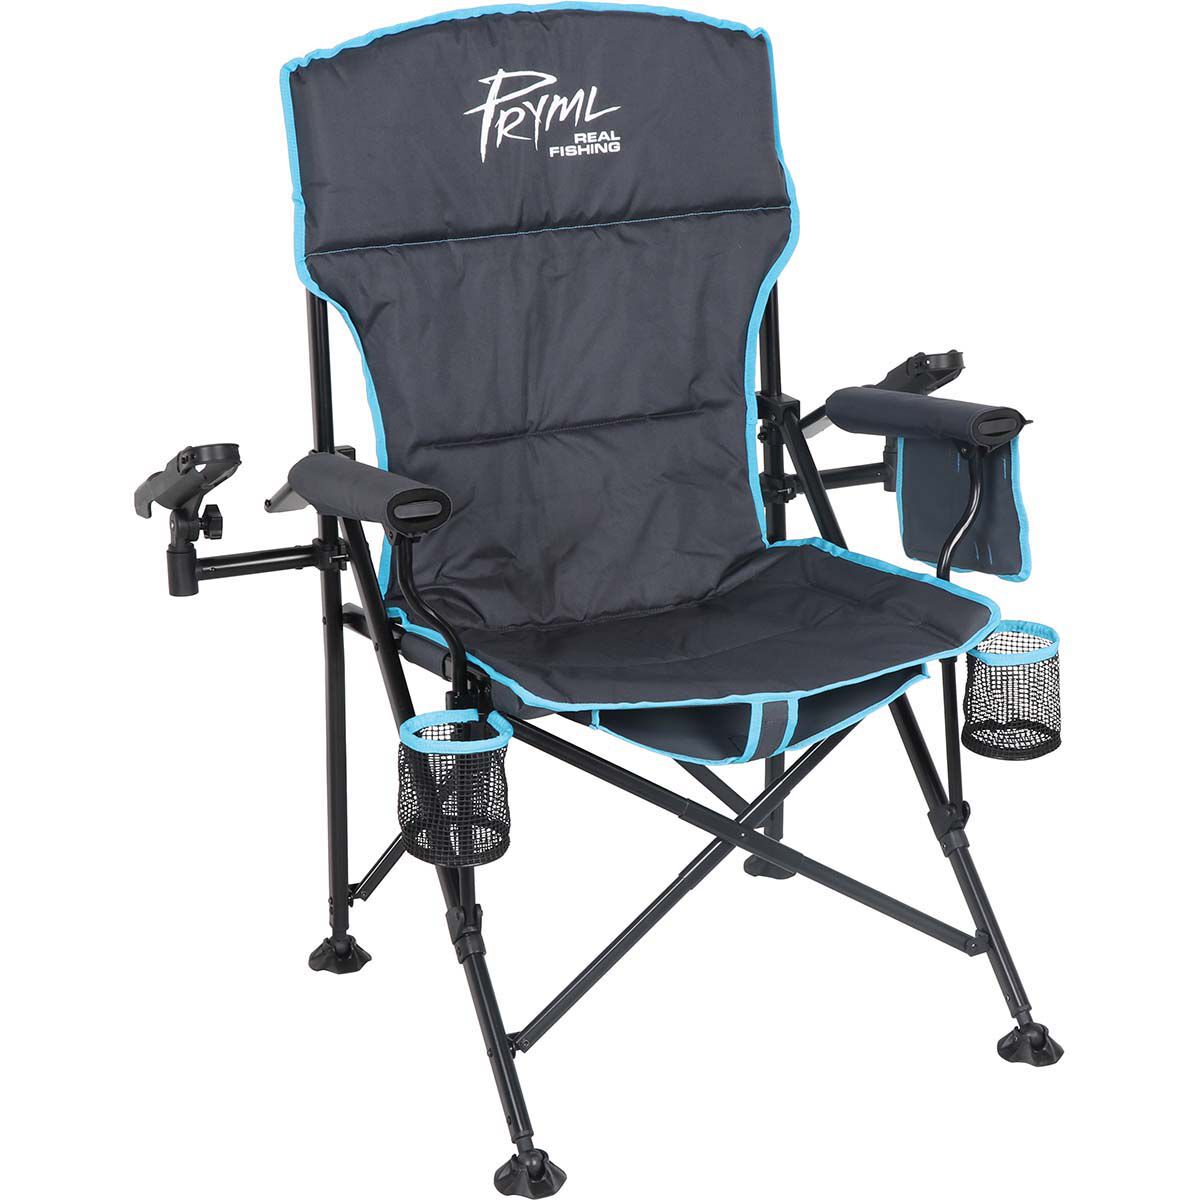  Fishing Chair with Rod Holder Built in Cooler Hands